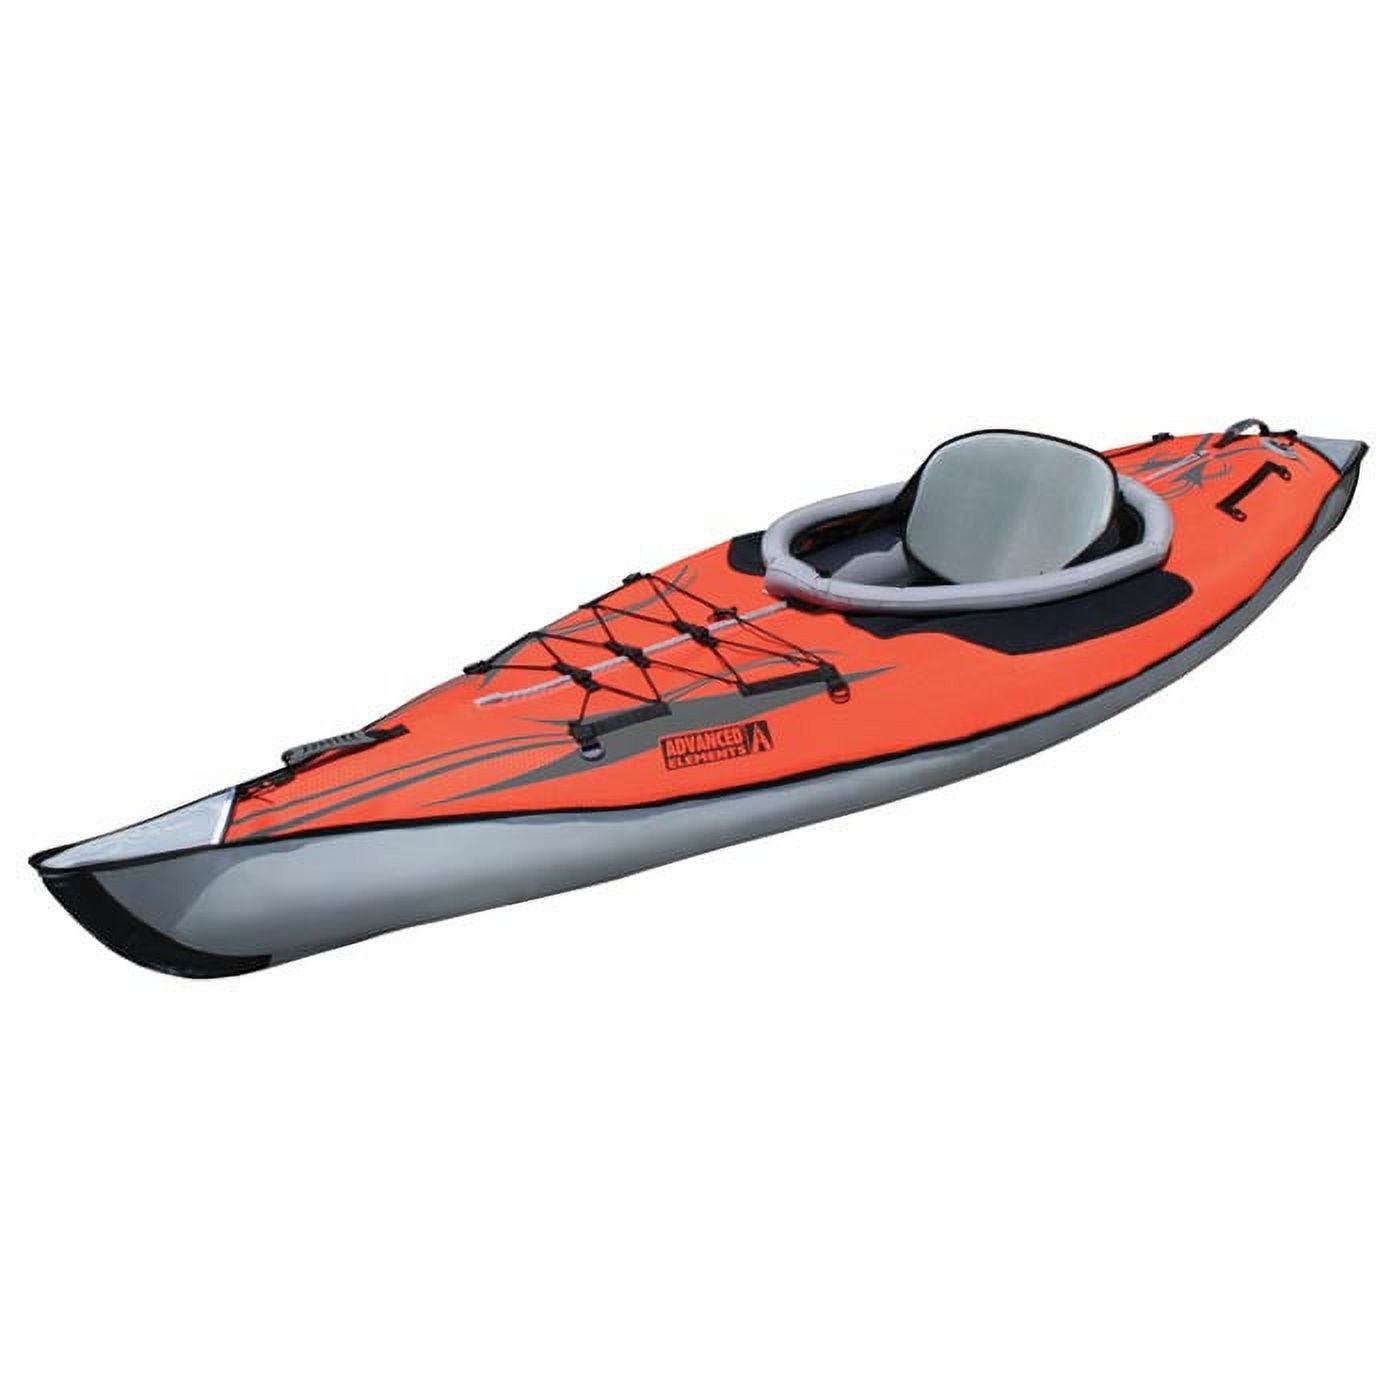 Advanced Elements Advancedframe Inflatable Kayak in Red and Gray - image 1 of 2